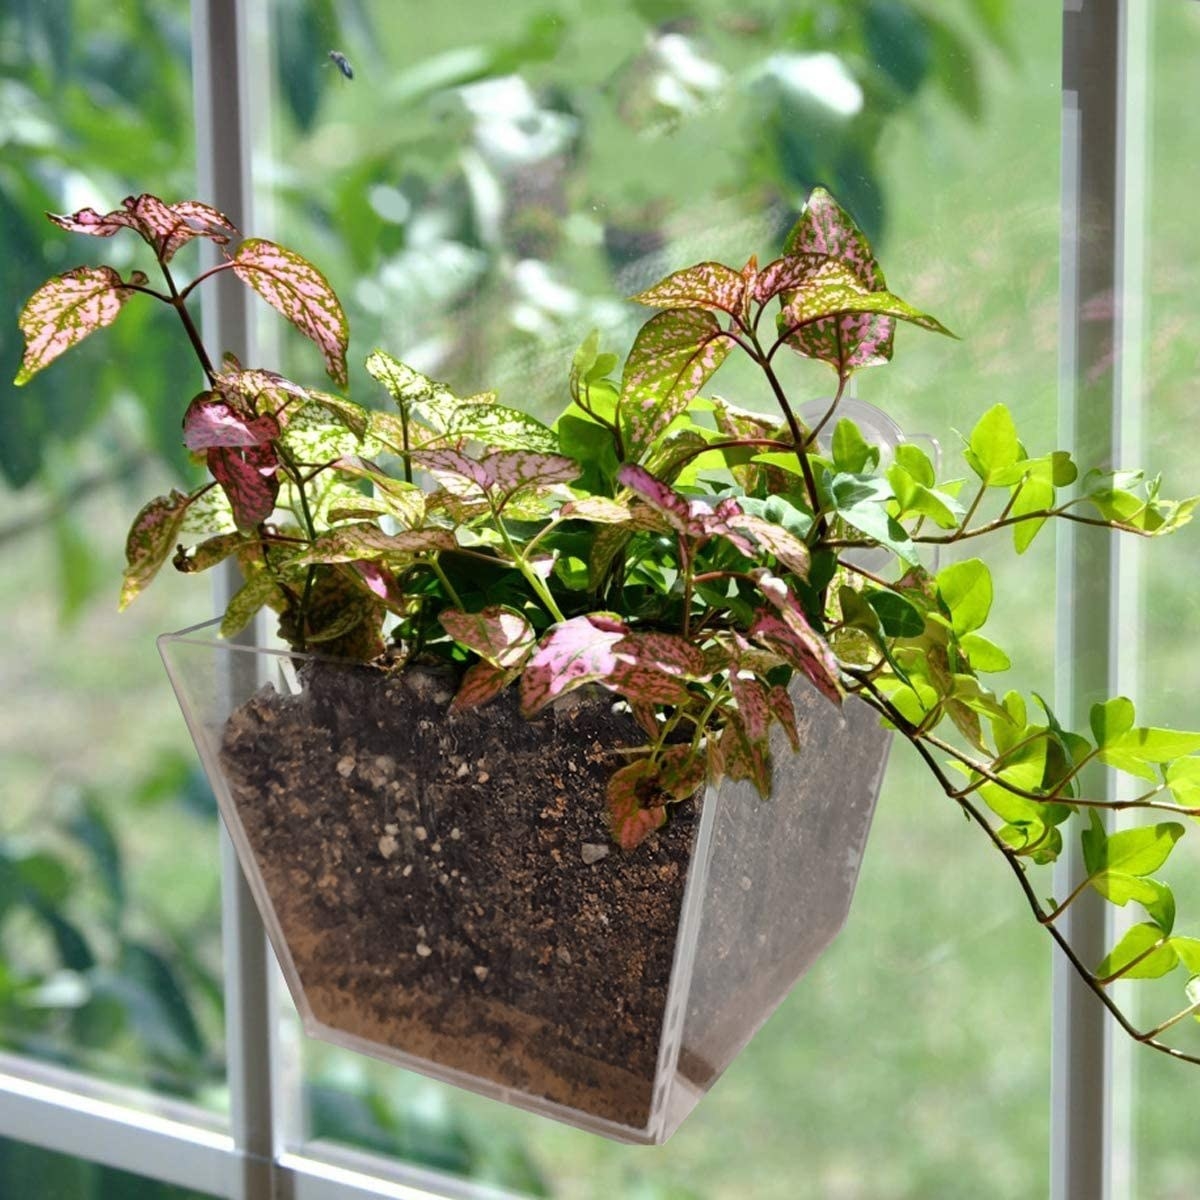 The square-shaped window planter